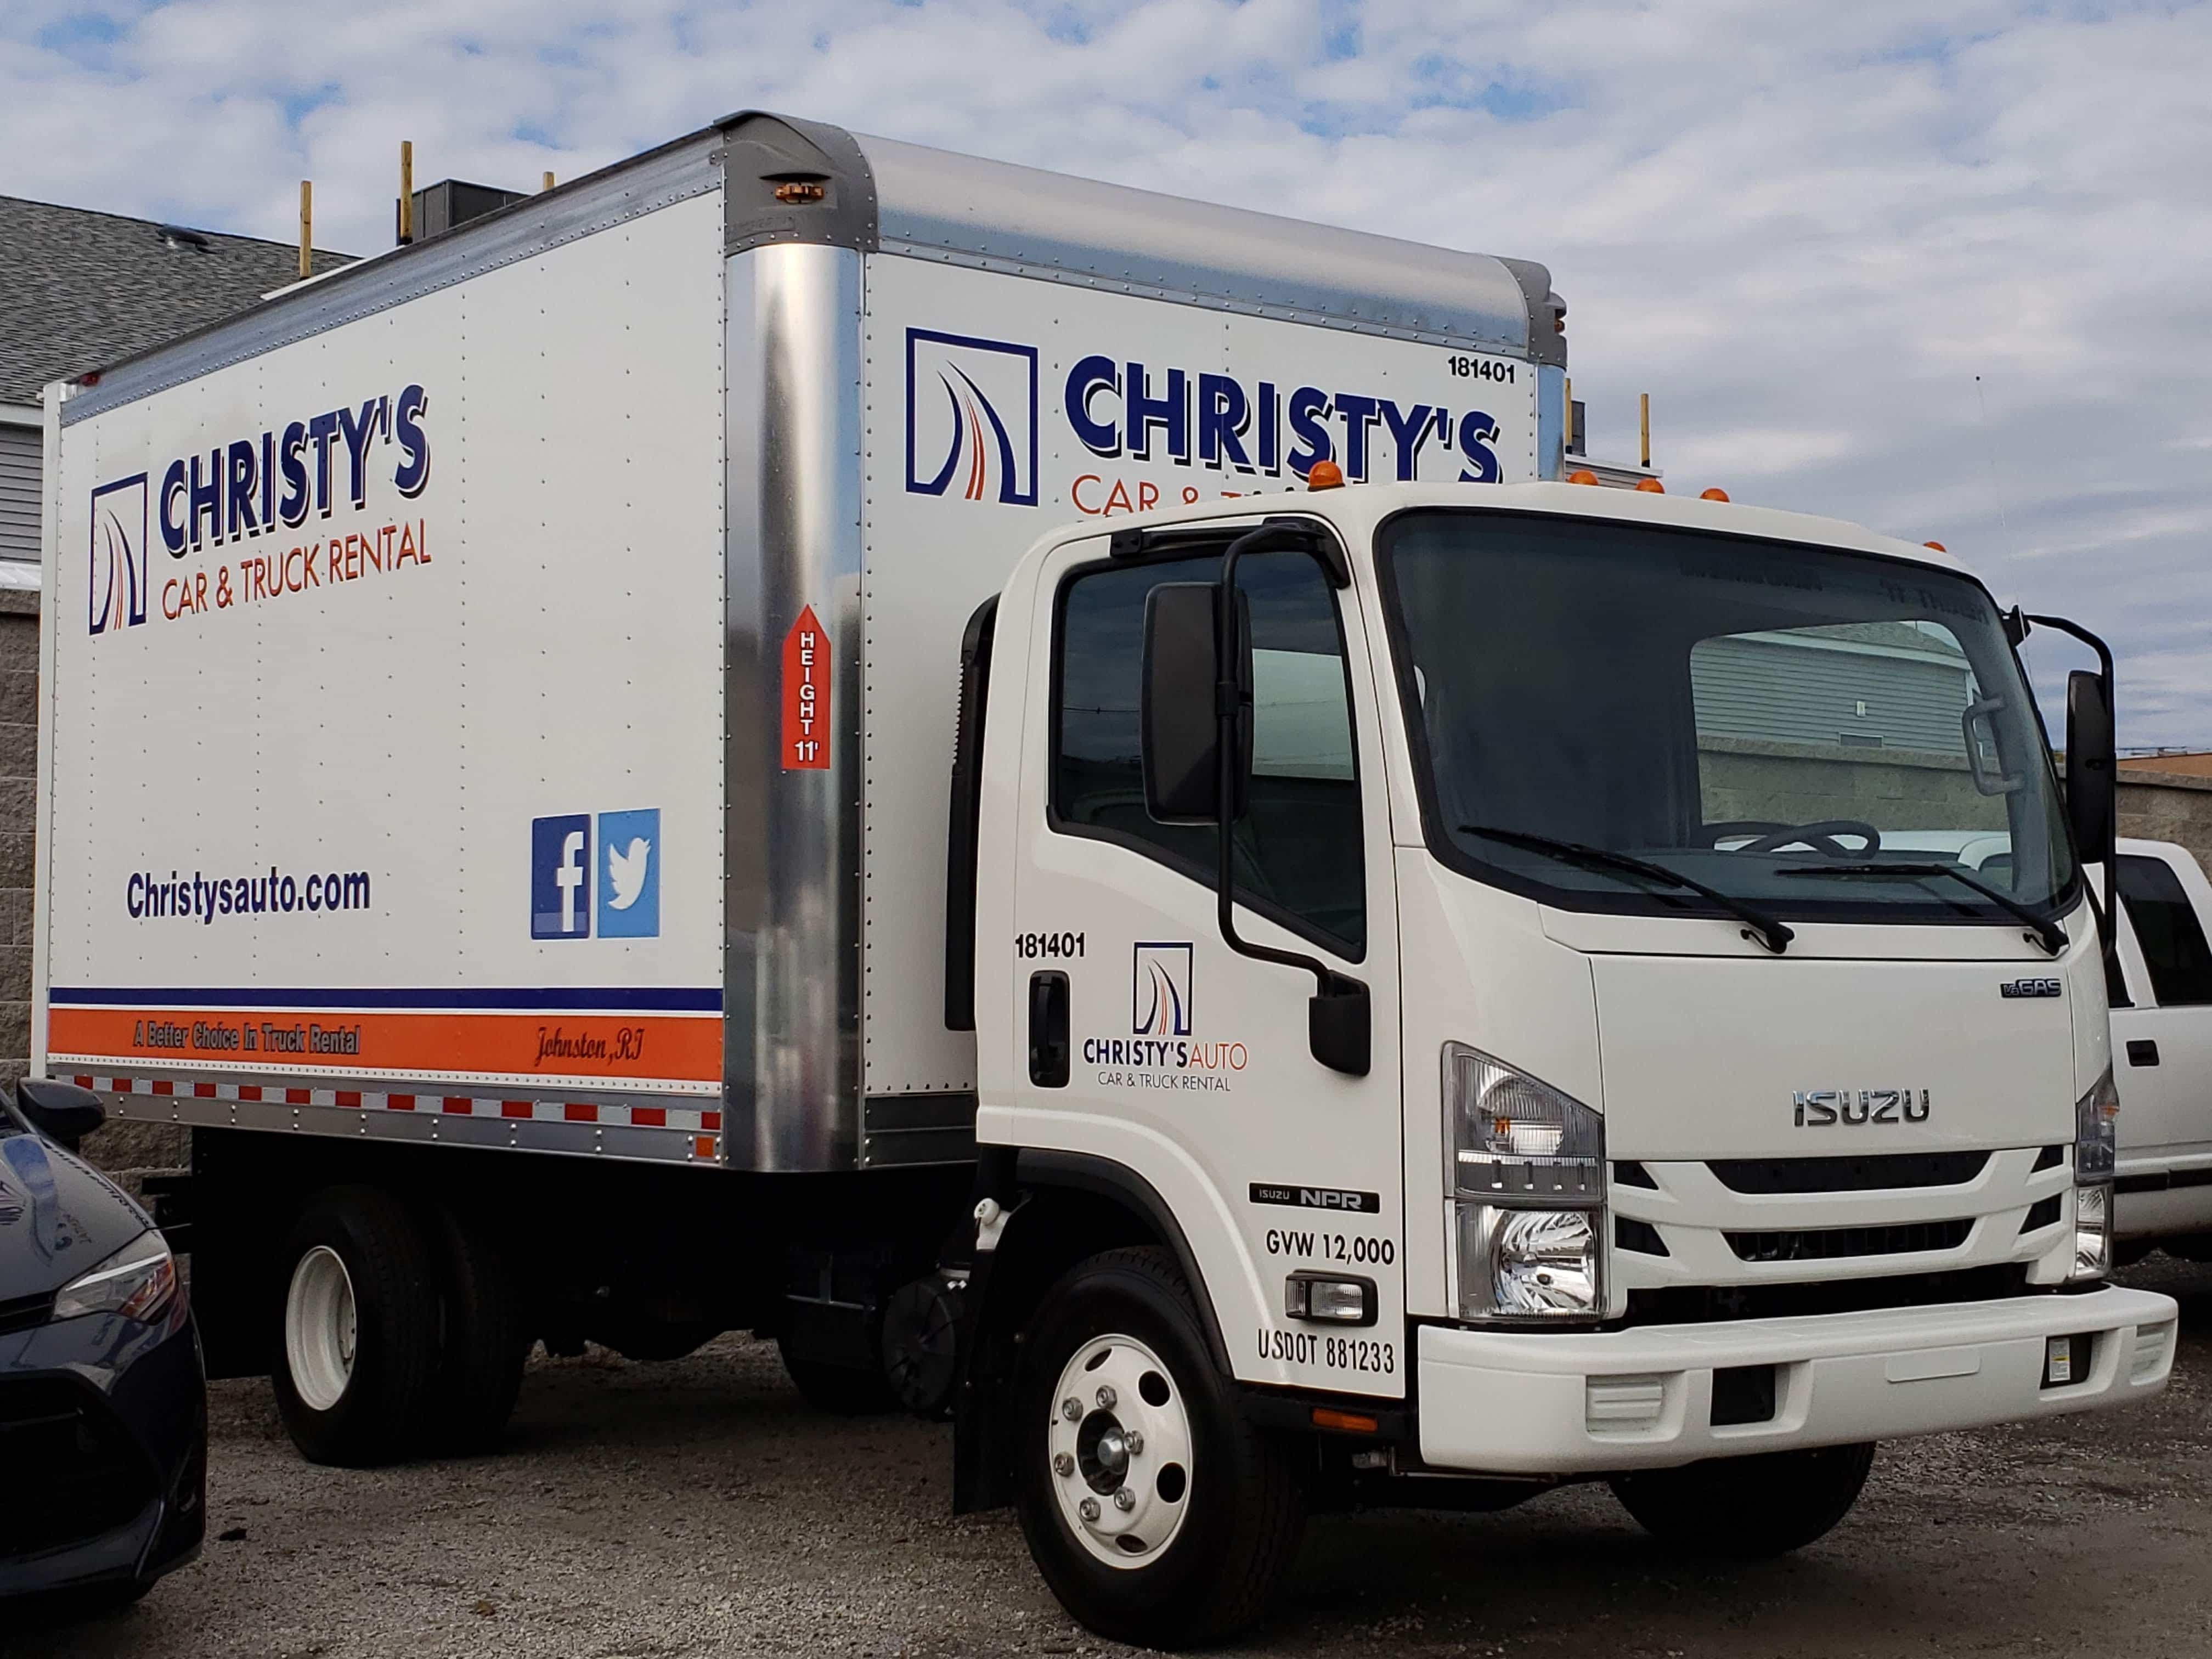 Do You Have An Upcoming Move? Rent A Truck From Christy’s!